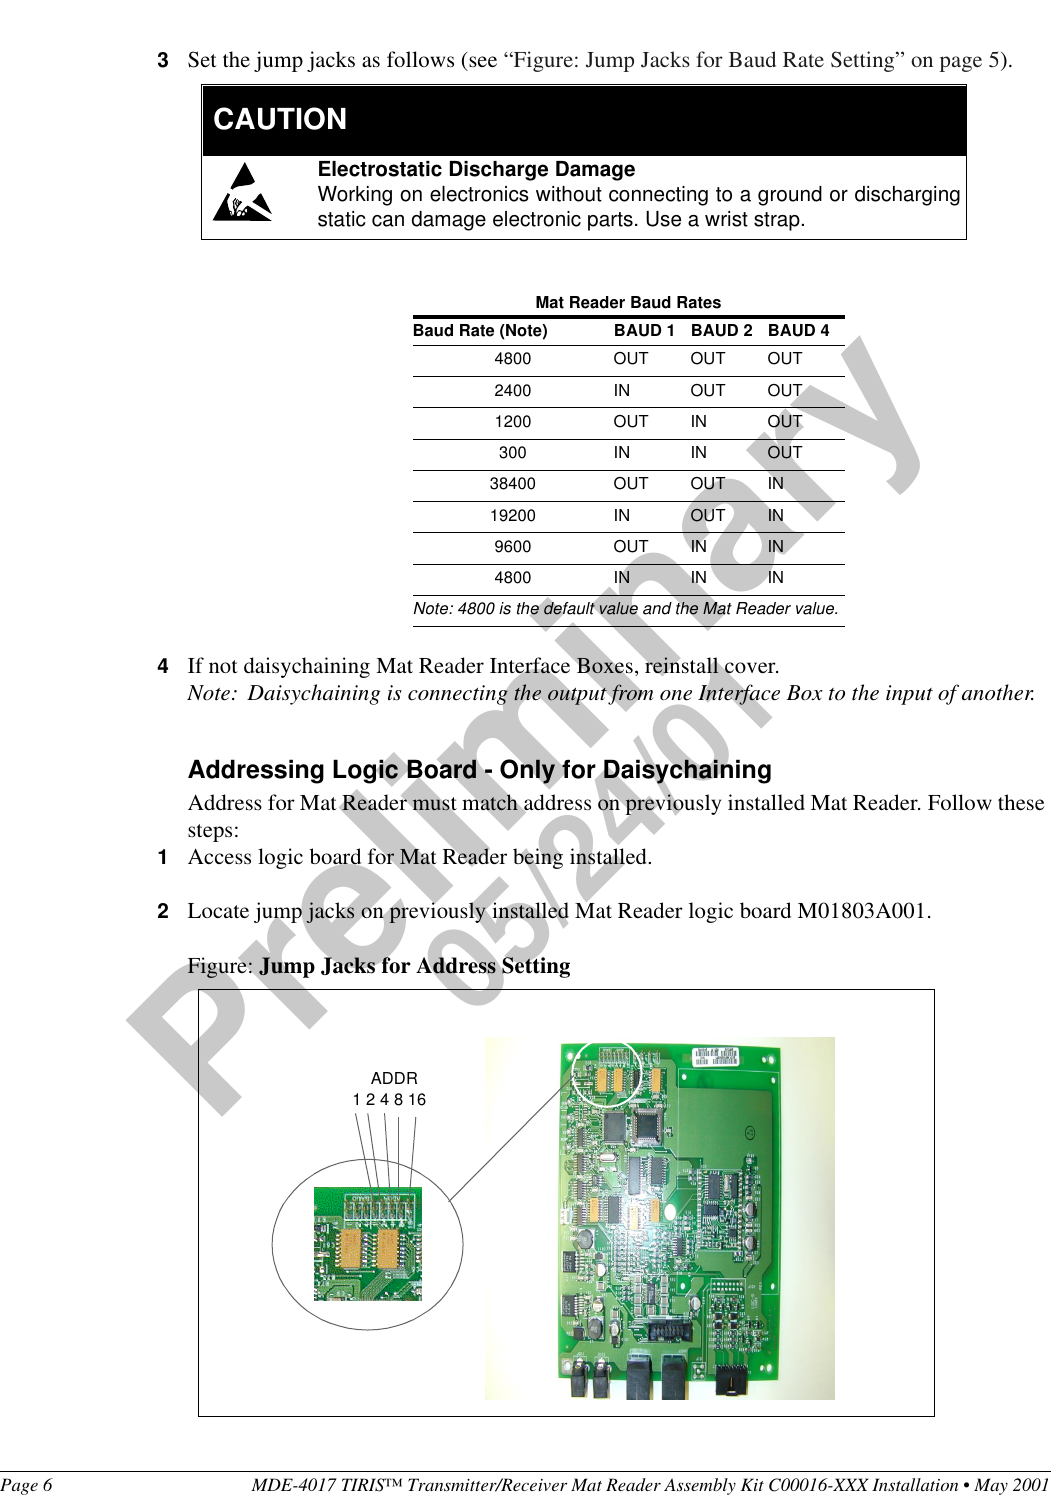 Page 6 MDE-4017 TIRIS™ Transmitter/Receiver Mat Reader Assembly Kit C00016-XXX Installation • May 2001Preliminary05/24/013Set the jump jacks as follows (see “Figure: Jump Jacks for Baud Rate Setting” on page 5).4If not daisychaining Mat Reader Interface Boxes, reinstall cover.Note: Daisychaining is connecting the output from one Interface Box to the input of another.Addressing Logic Board - Only for DaisychainingAddress for Mat Reader must match address on previously installed Mat Reader. Follow these steps:1Access logic board for Mat Reader being installed.2Locate jump jacks on previously installed Mat Reader logic board M01803A001.Figure: Jump Jacks for Address SettingMat Reader Baud RatesBaud Rate (Note) BAUD 1 BAUD 2 BAUD 44800 OUT OUT OUT2400 IN OUT OUT1200 OUT IN OUT300 IN IN OUT38400 OUT OUT IN19200 IN OUT IN9600 OUT IN IN4800 IN IN INNote: 4800 is the default value and the Mat Reader value.Electrostatic Discharge DamageWorking on electronics without connecting to a ground or dischargingstatic can damage electronic parts. Use a wrist strap.  CAUTION    ADDR1 2 4 8 16